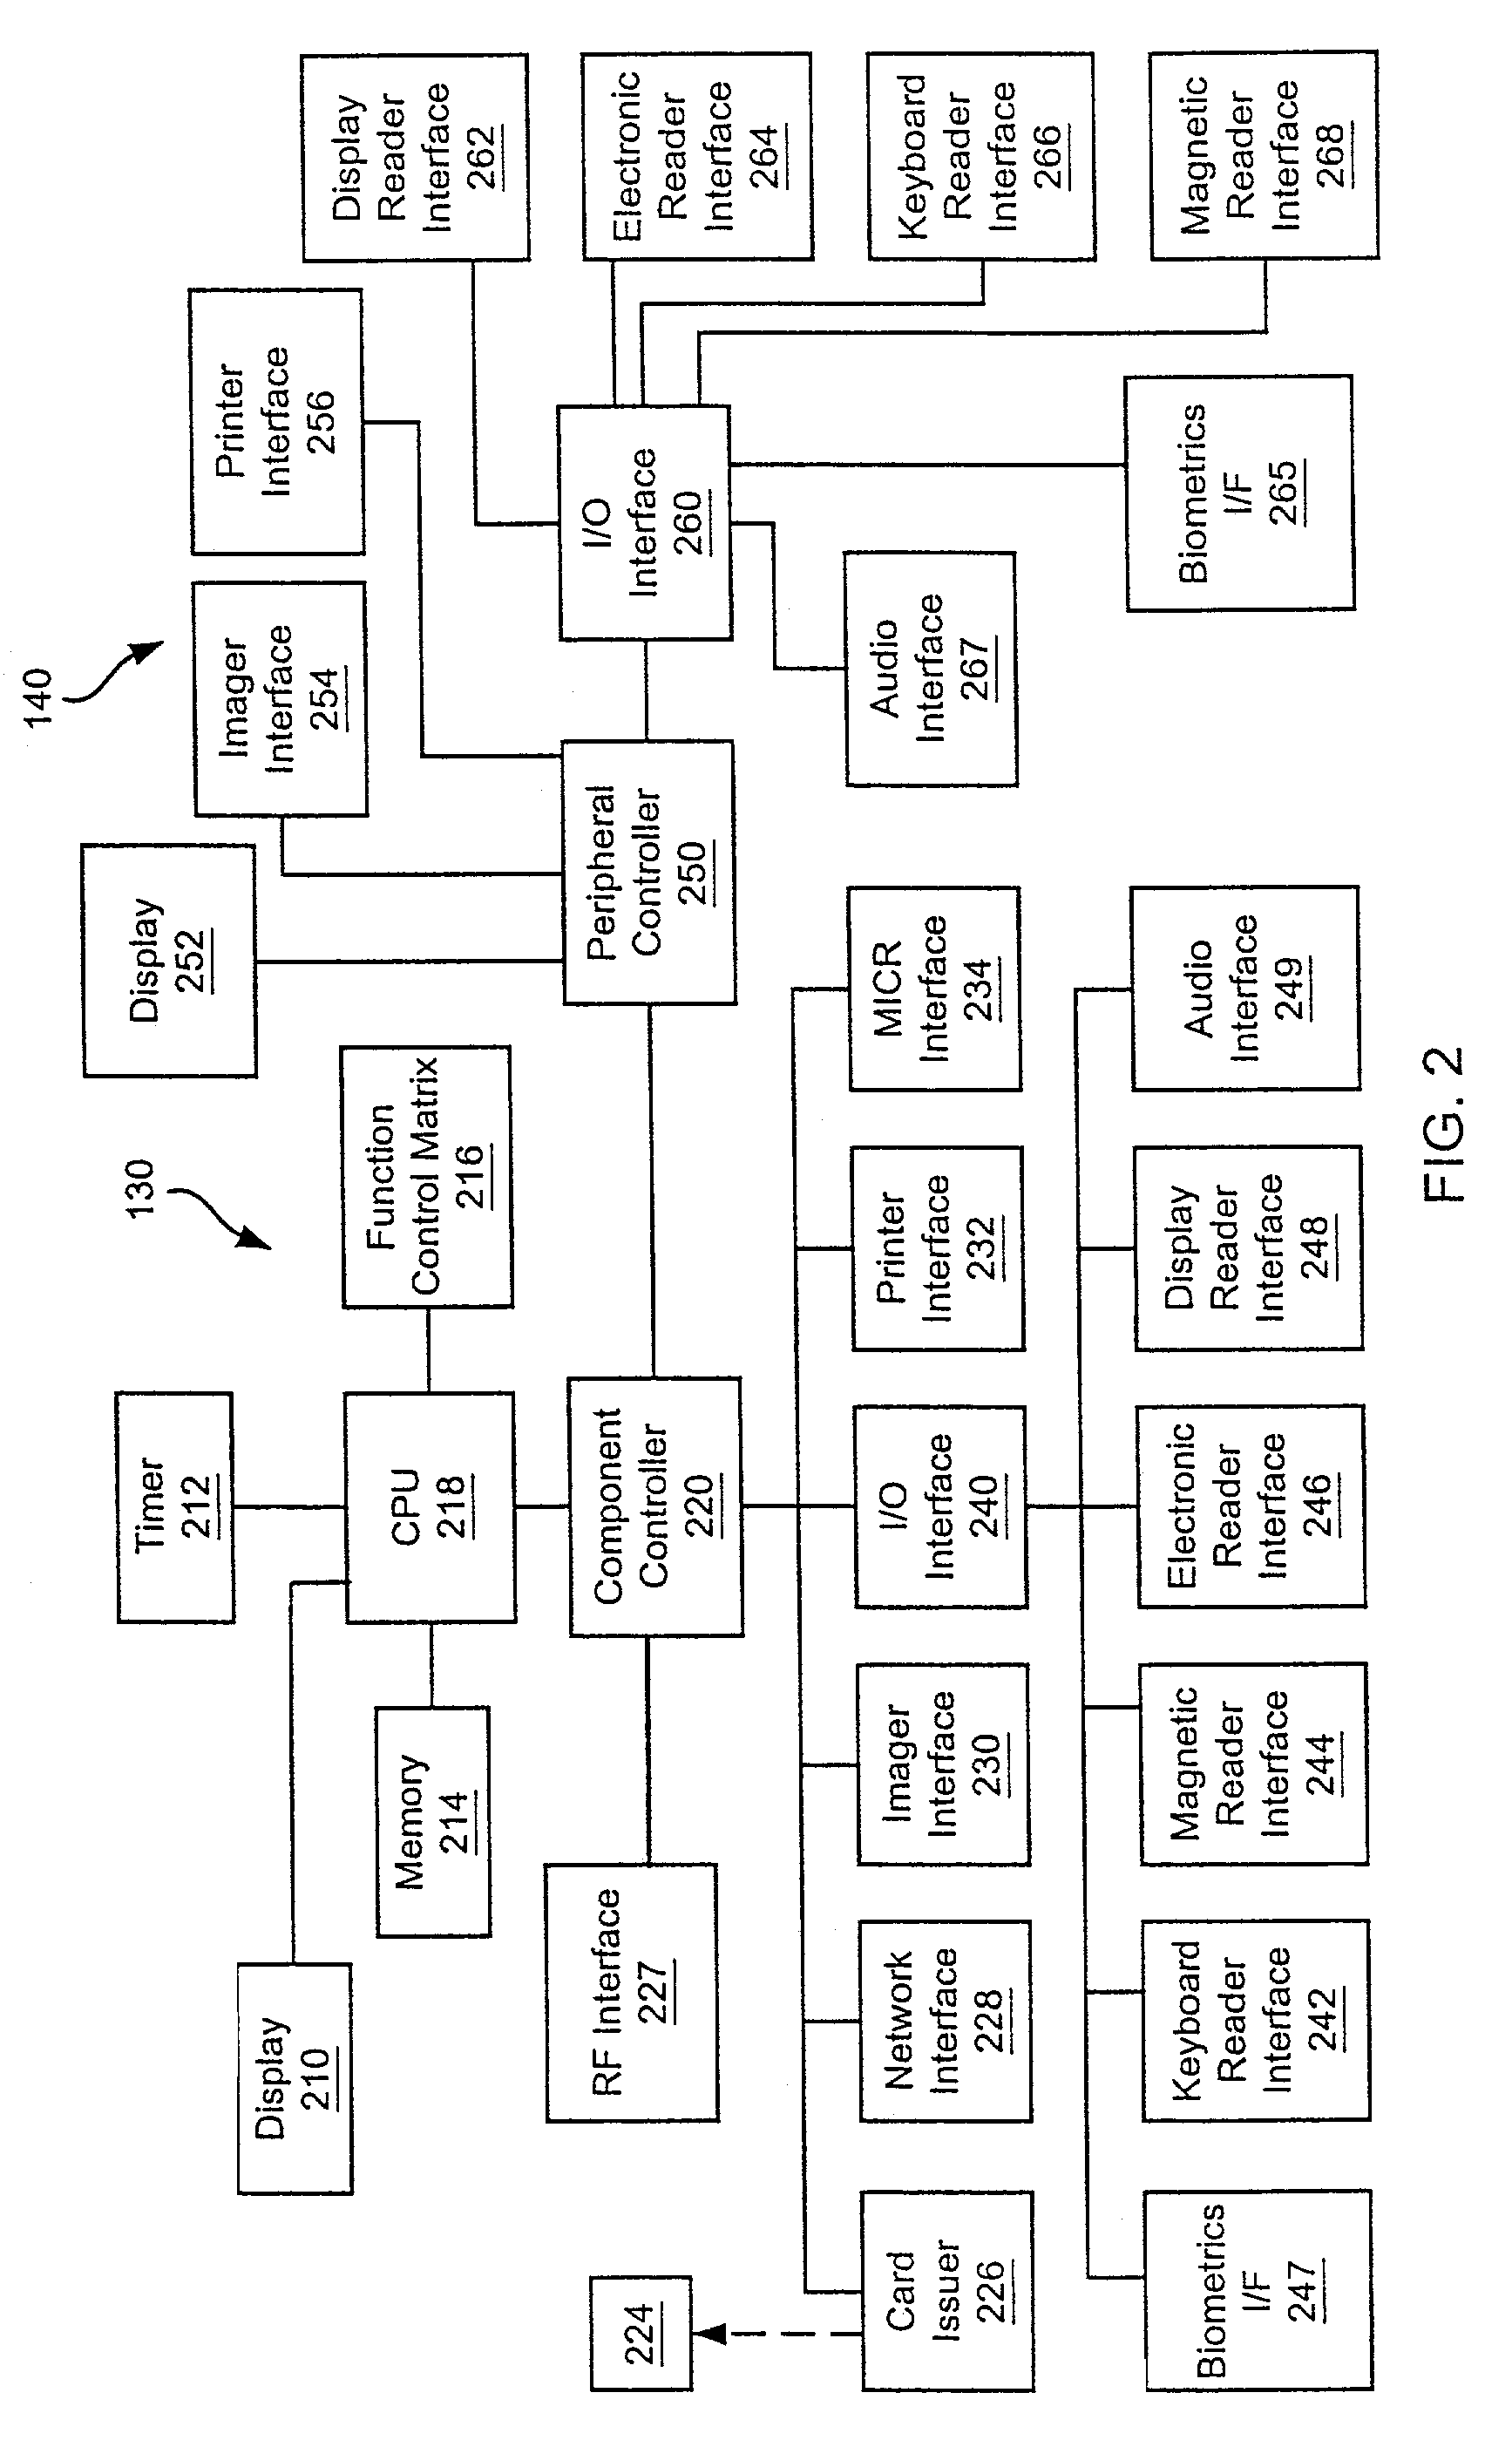 Systems and methods for configuring a point-of-sale system